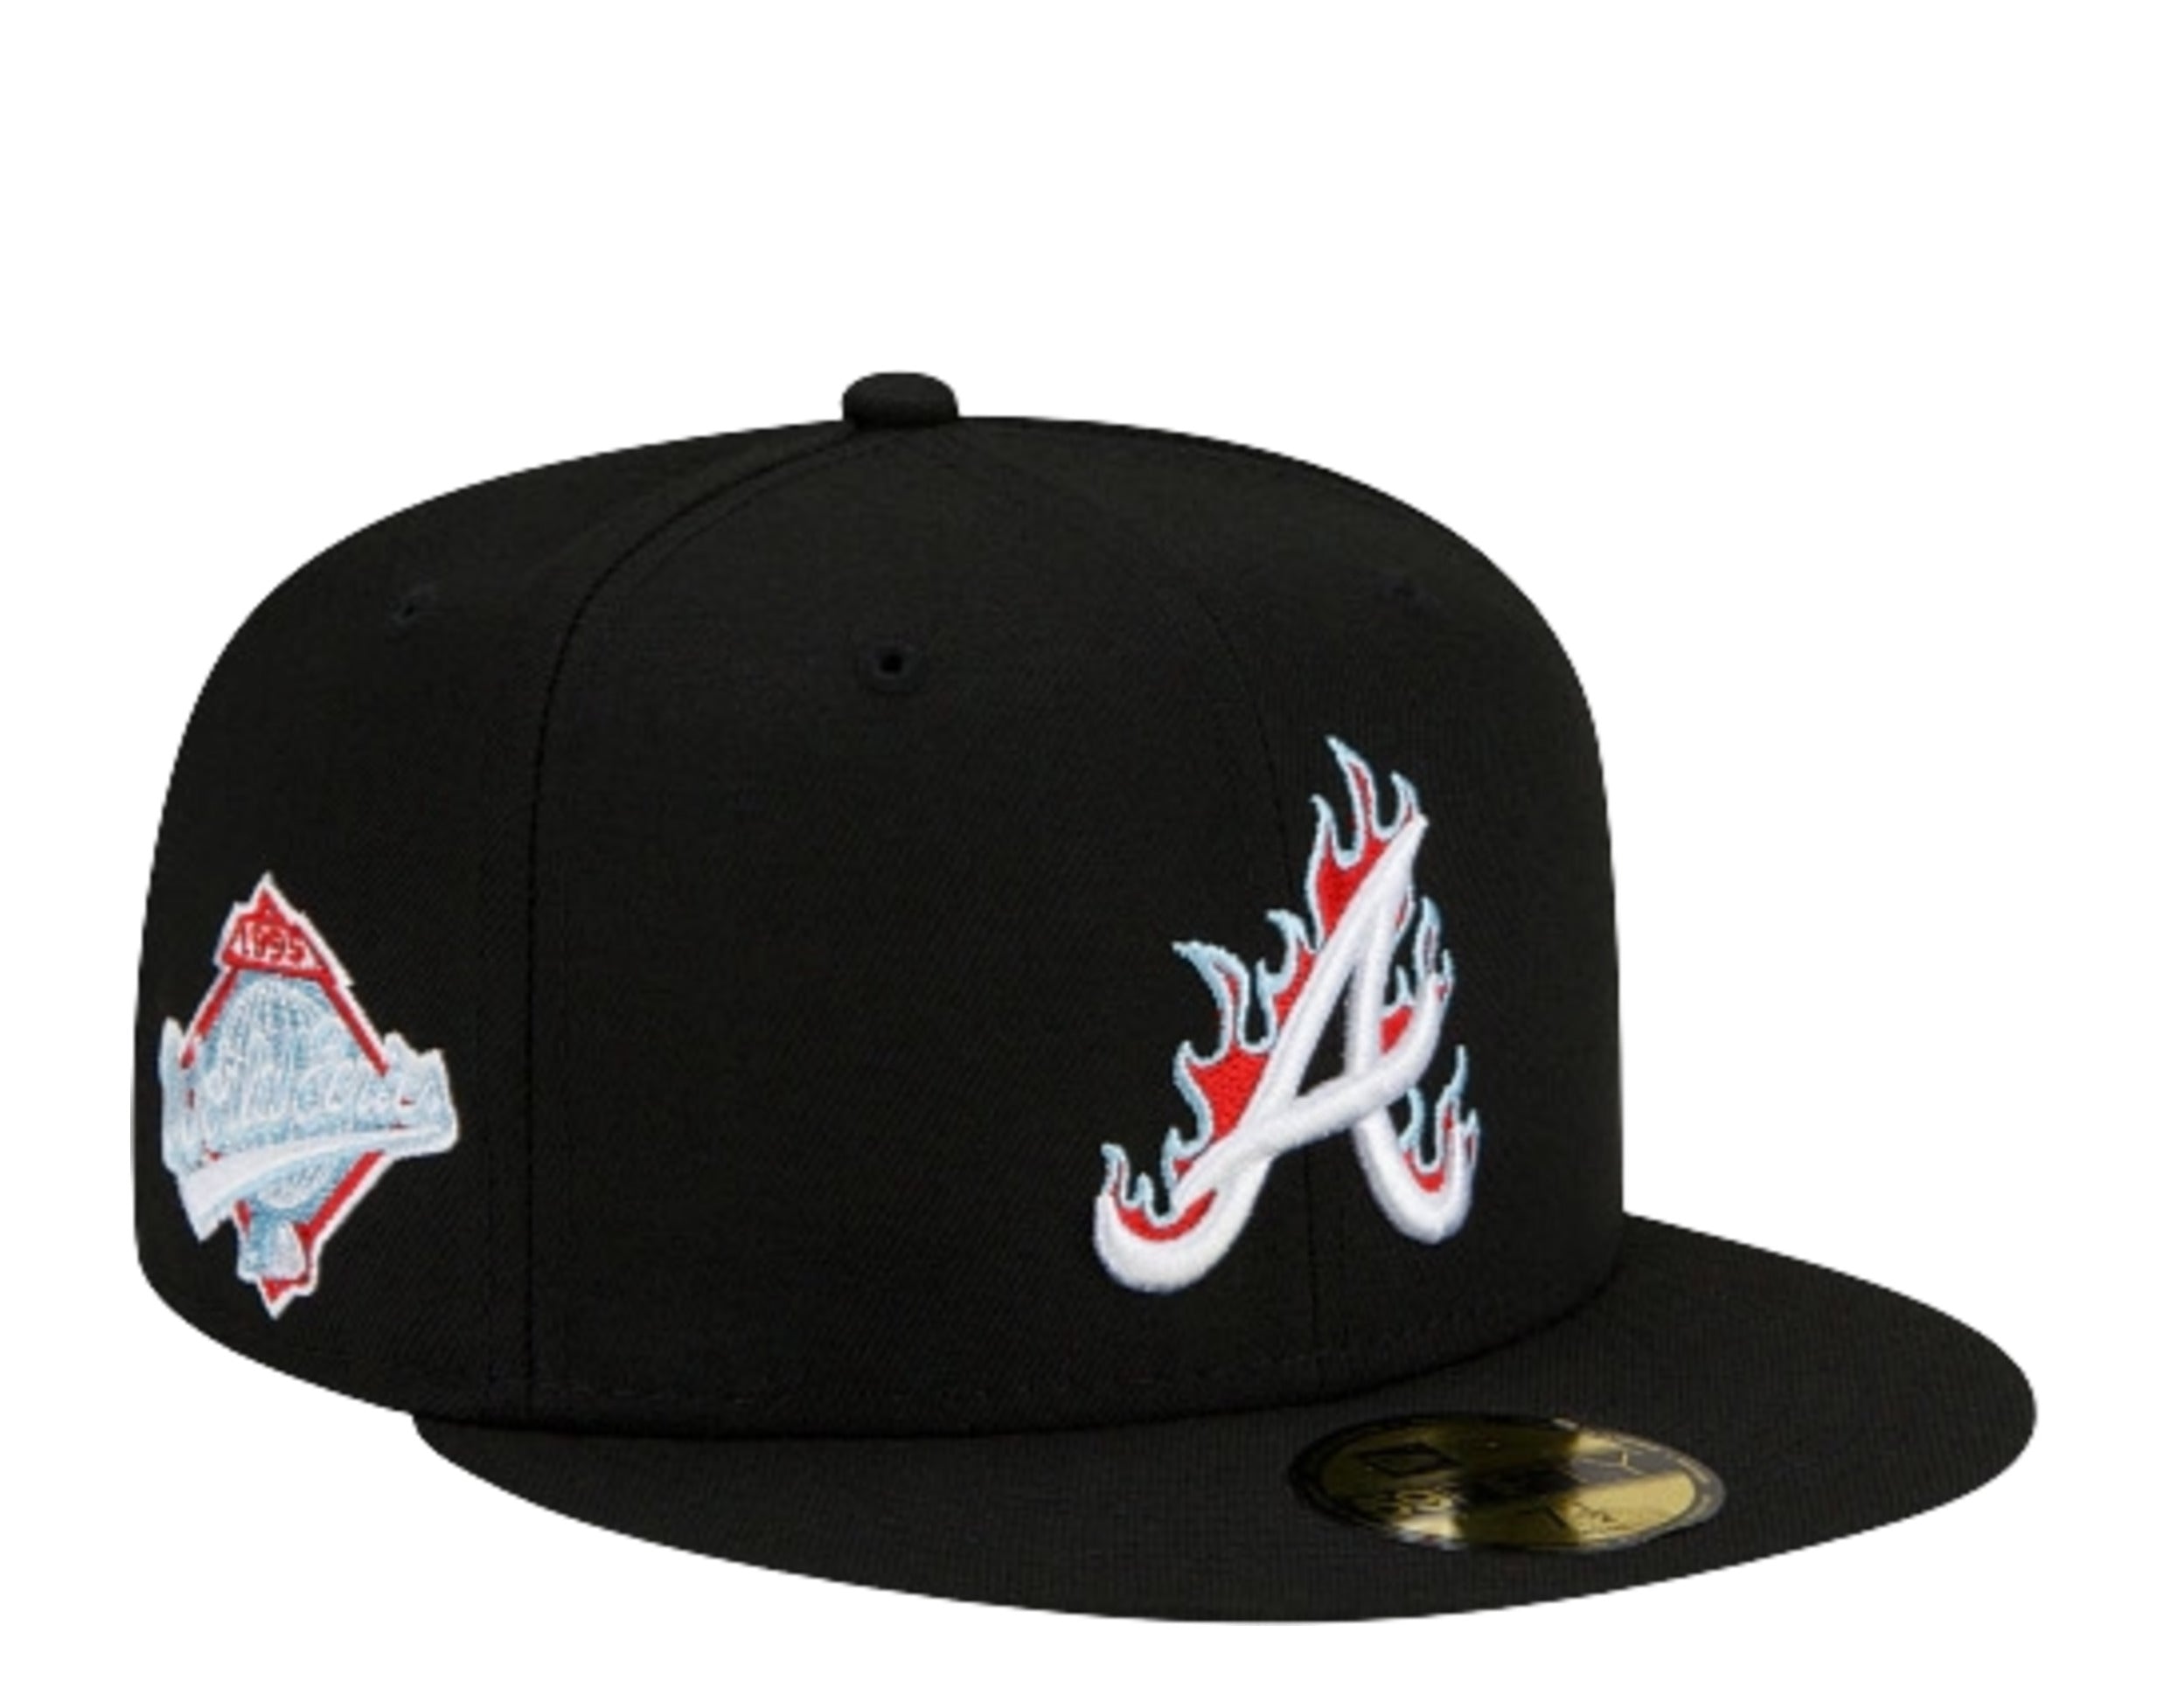 Atlanta Braves City Connect gear is fire and available now